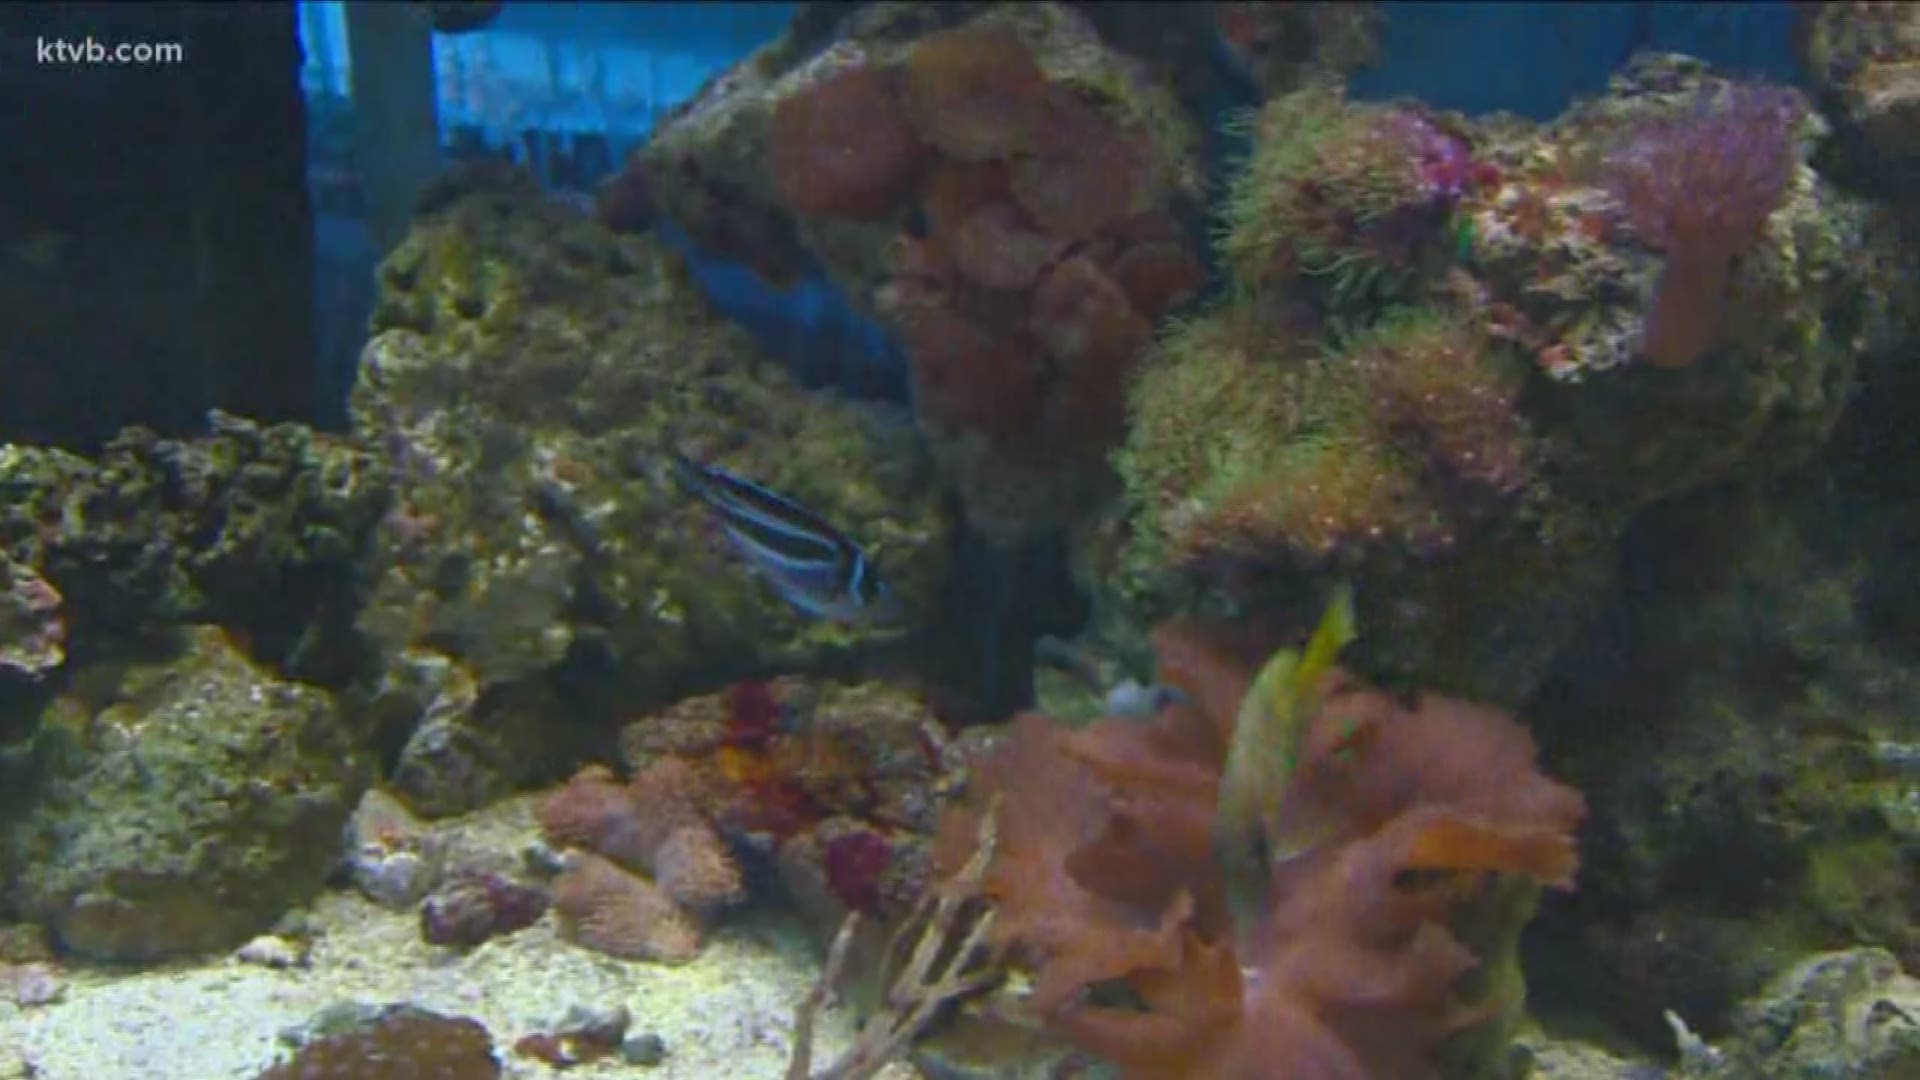 The source of the toxin is coral in their salt water aquarium.